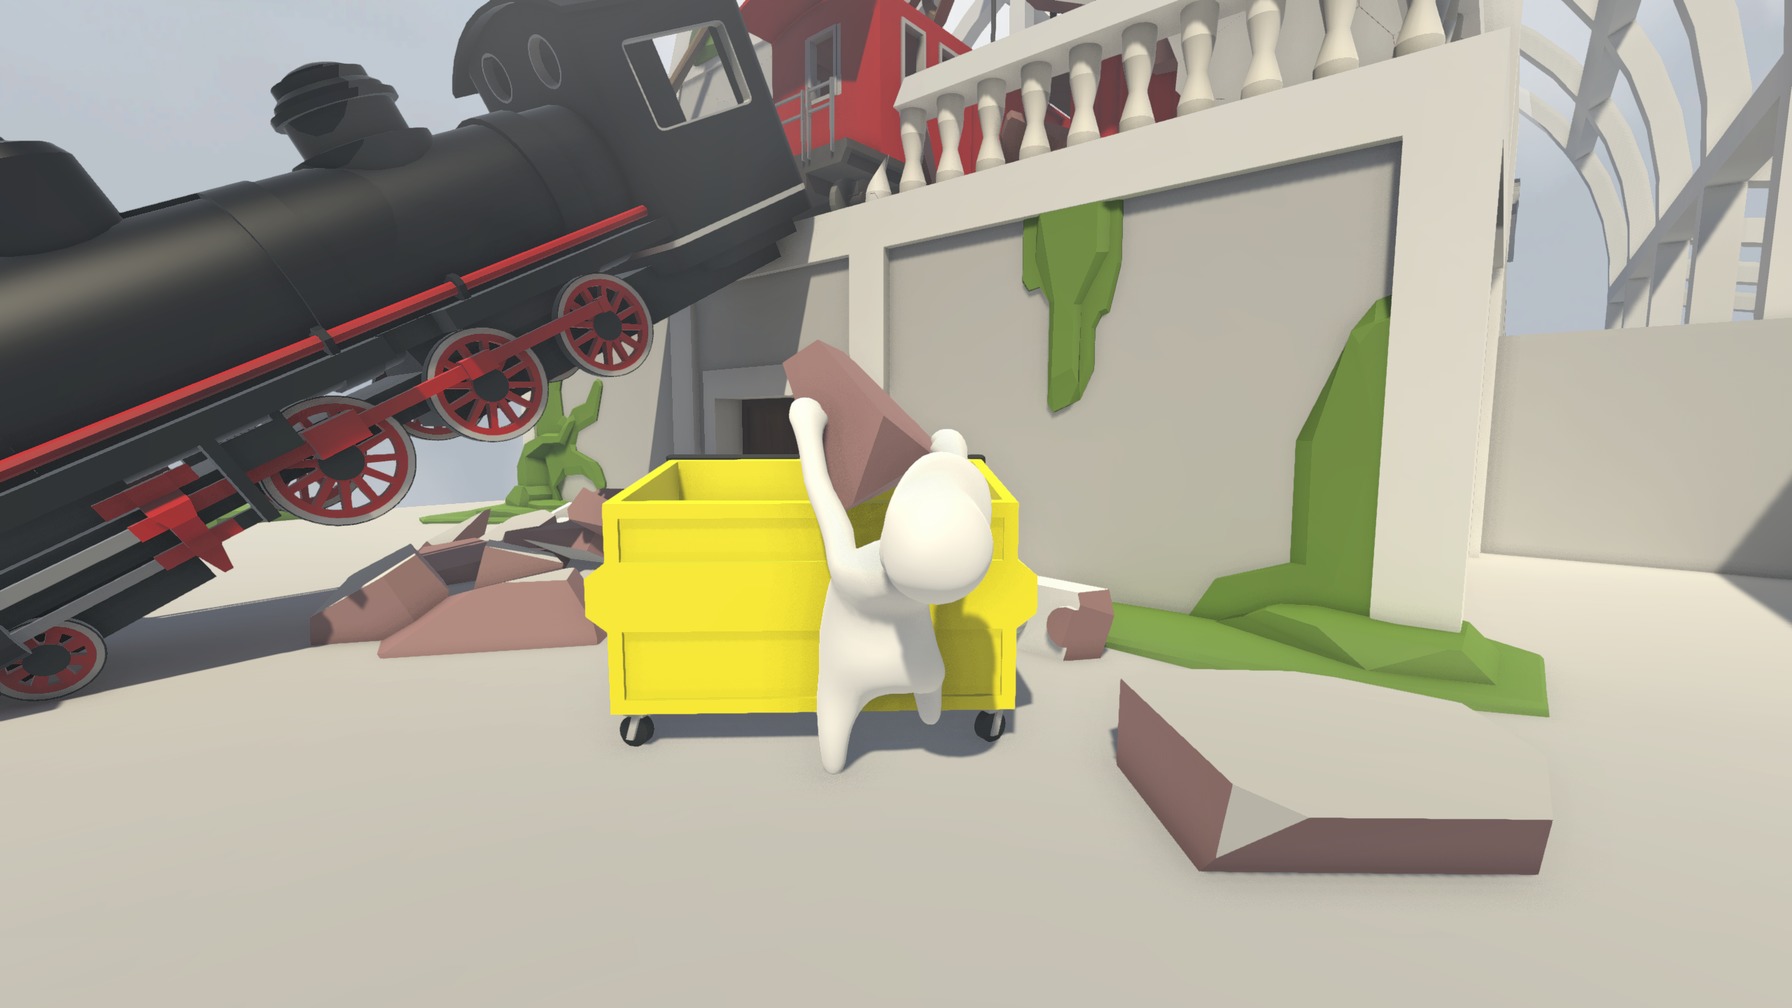 Physics Based 3d Puzzler Human Fall Flat Released On Steam For